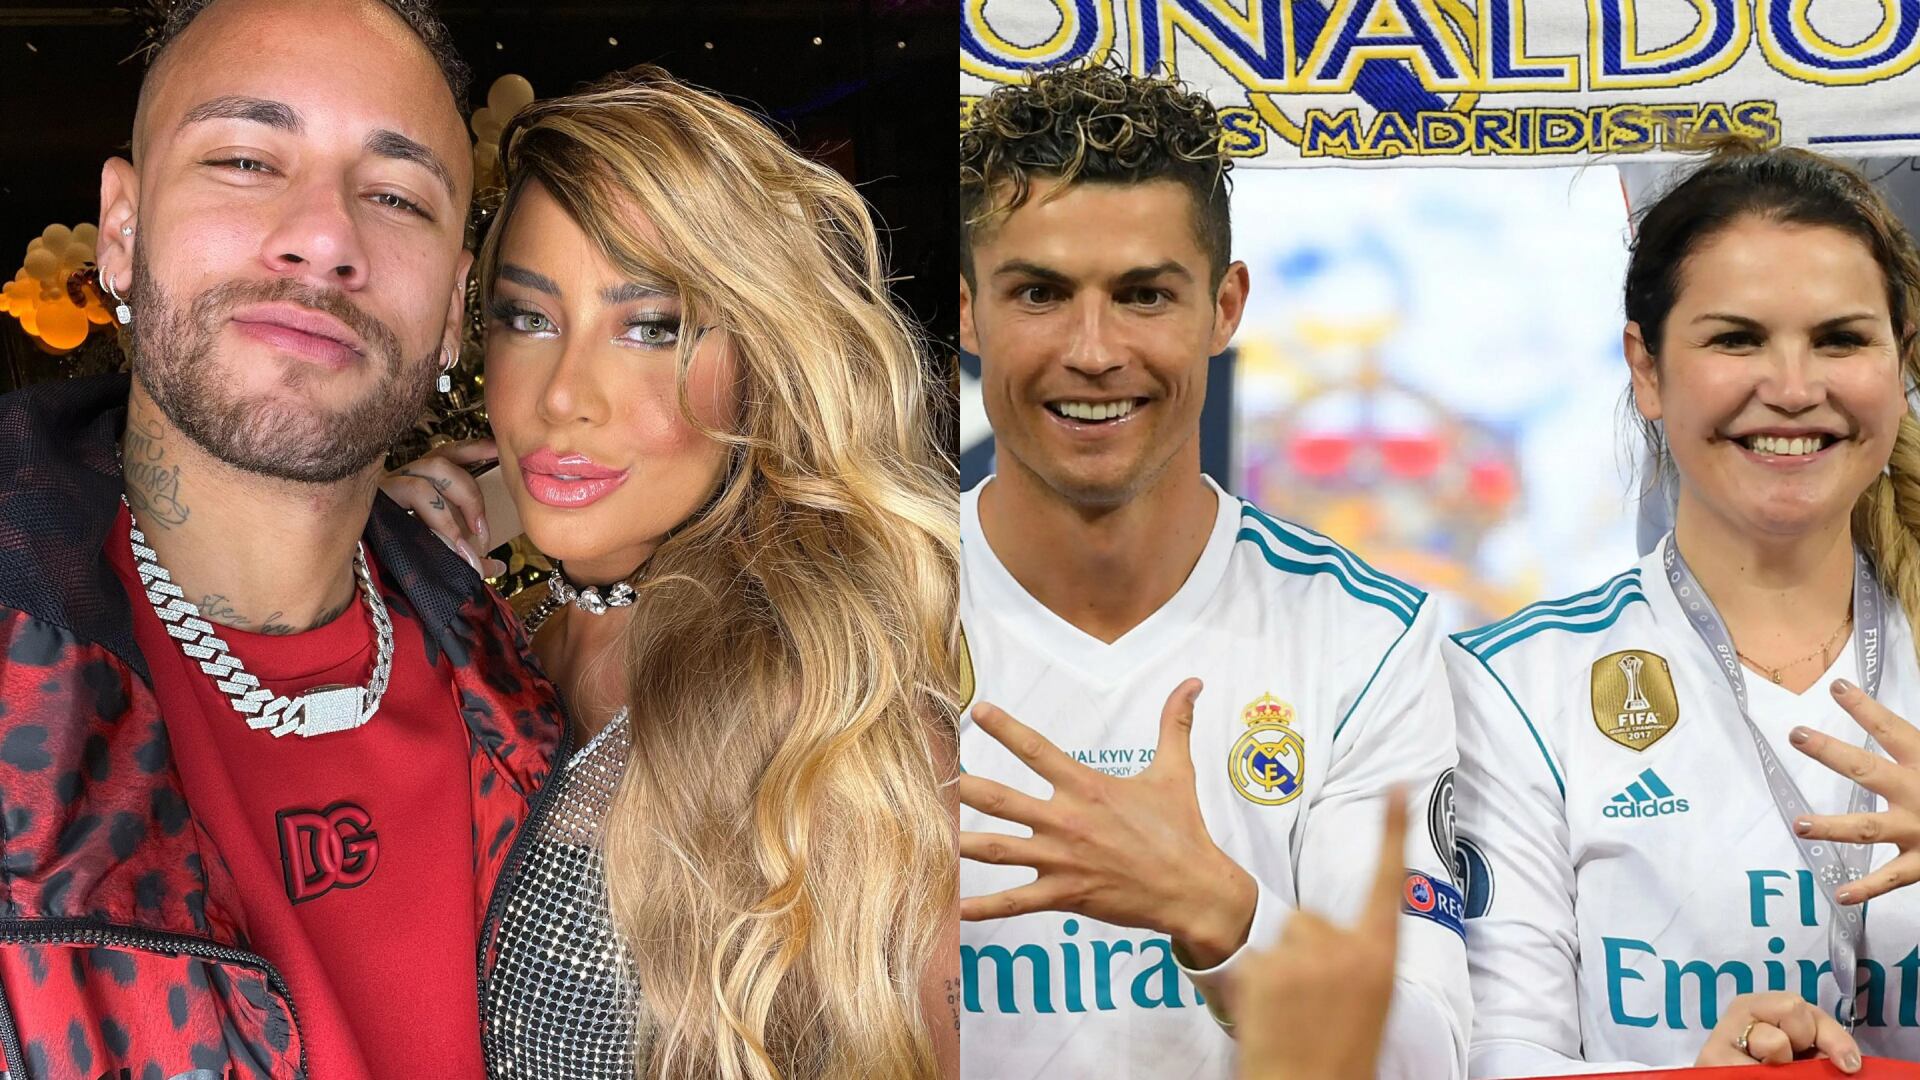 While Neymar's sister likes partying, Cristiano's sister does this